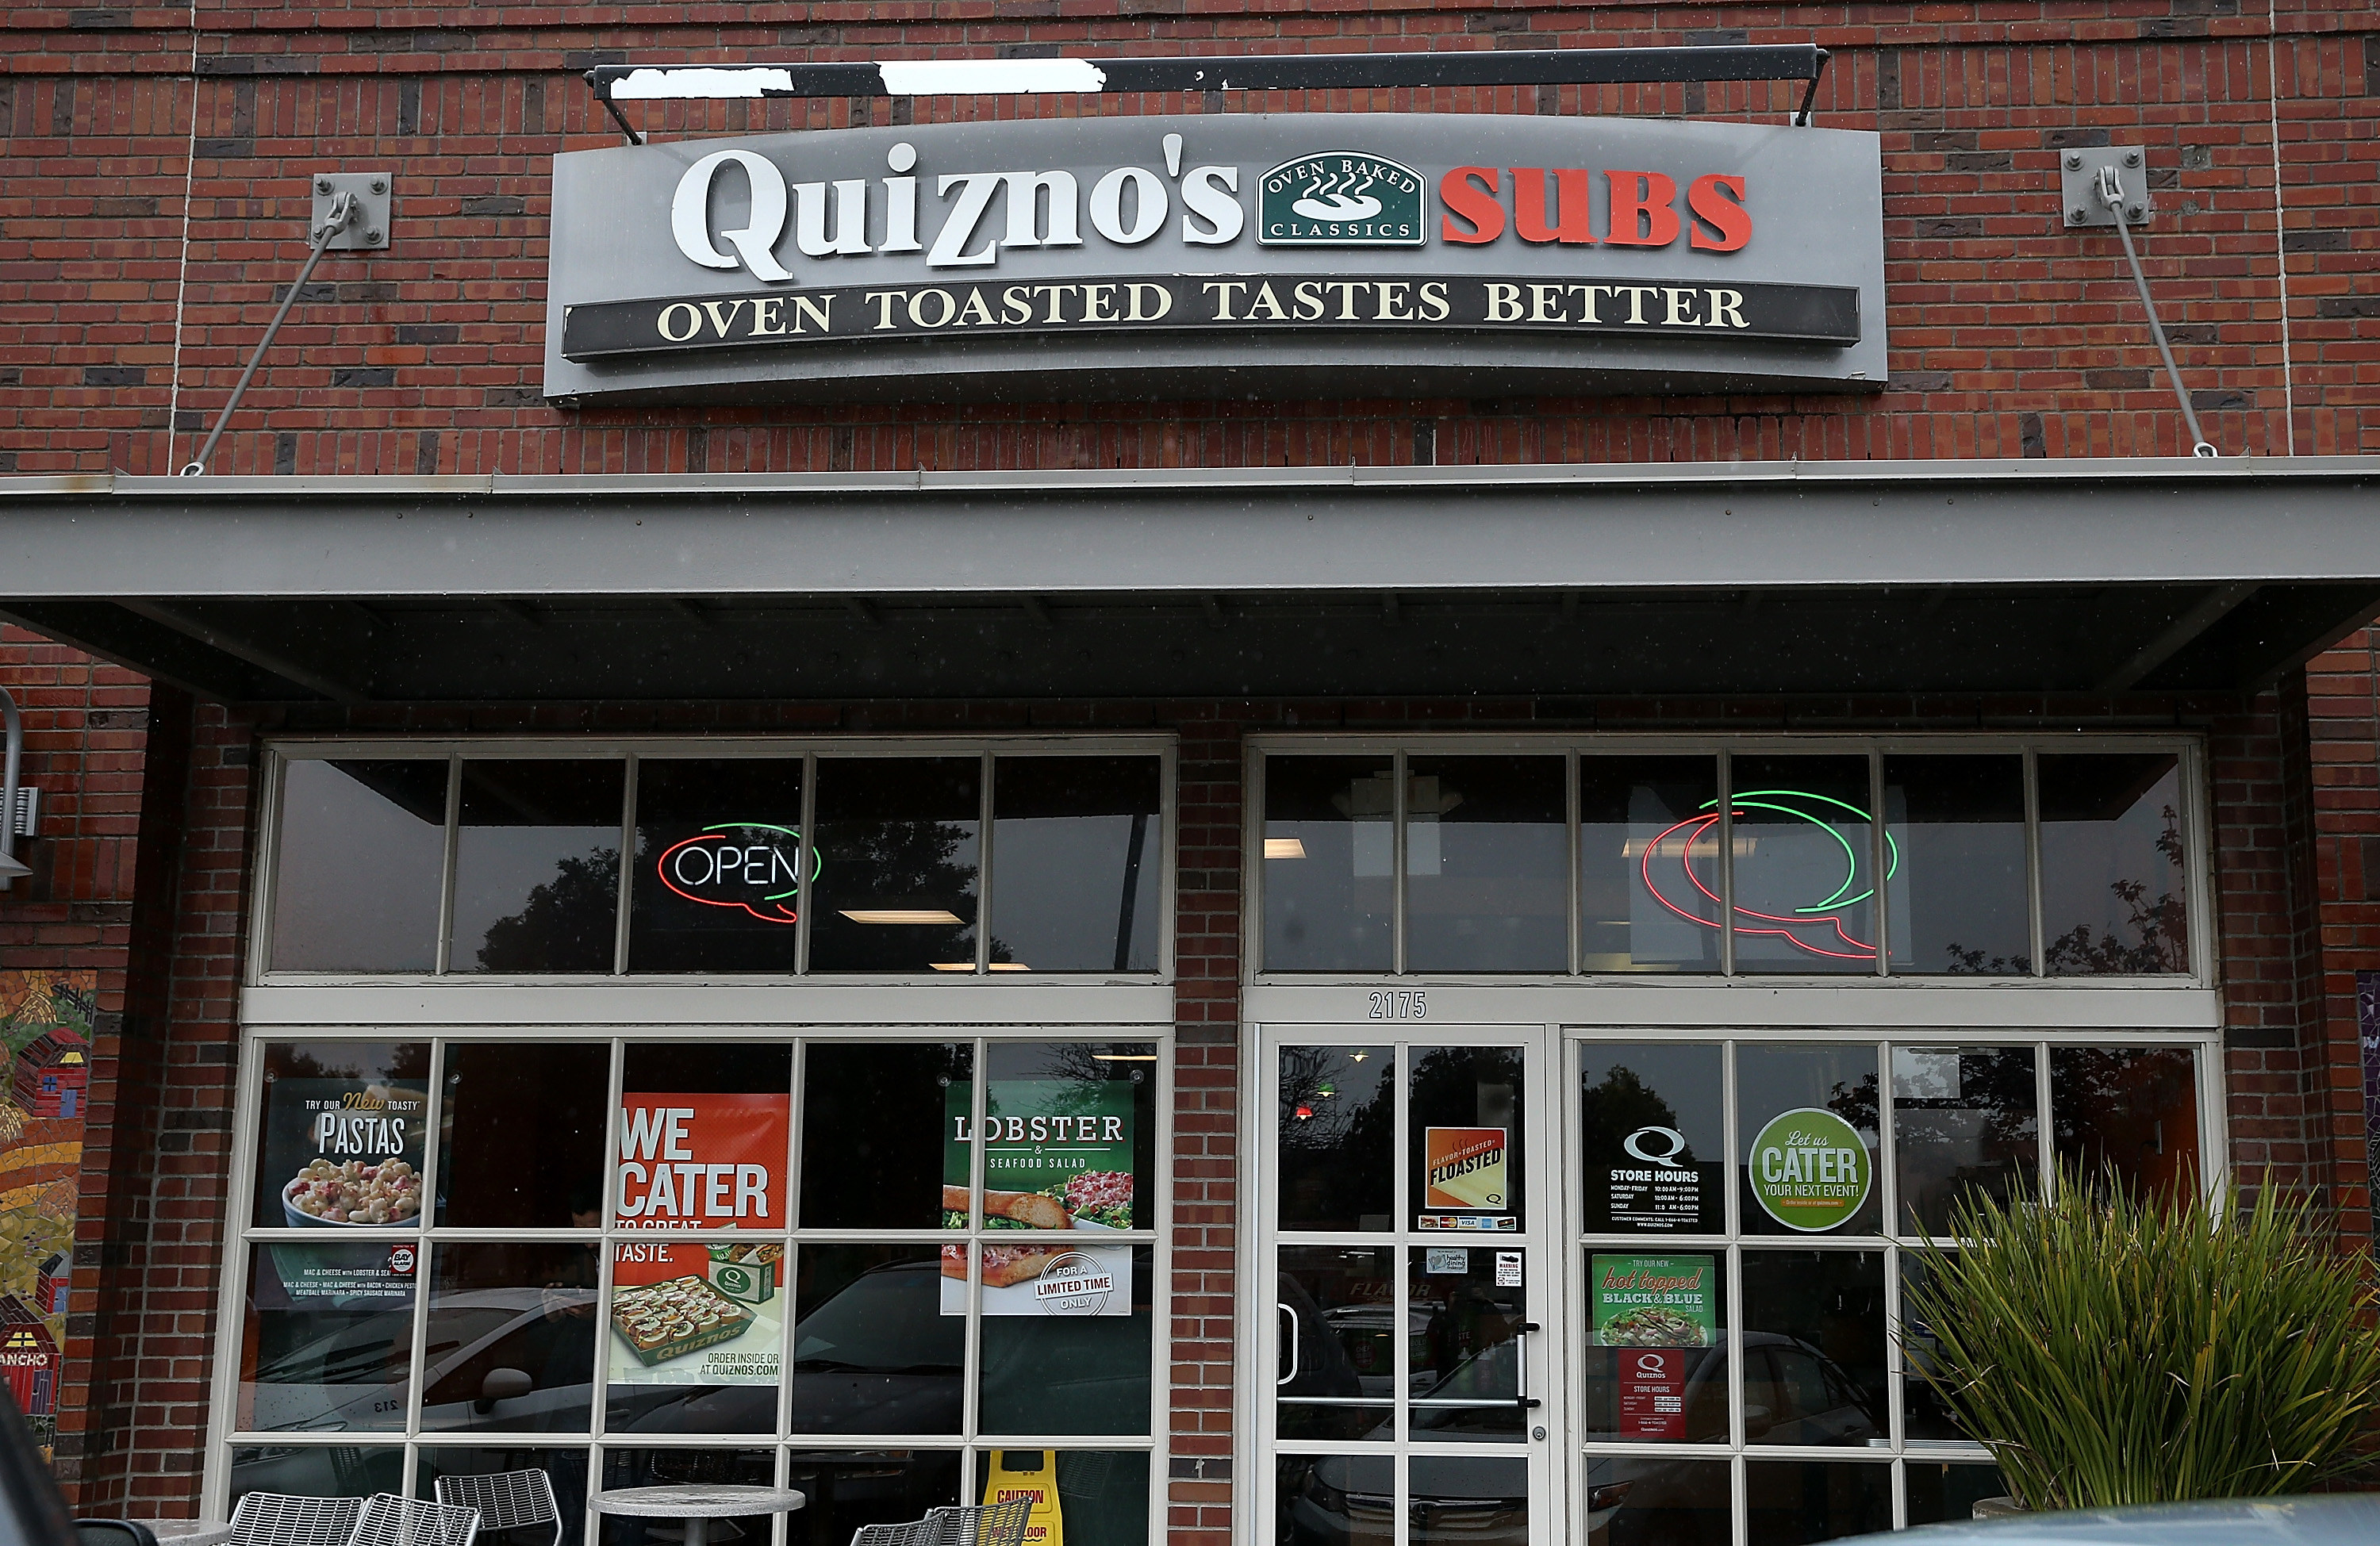 The storefront of a Quiznos